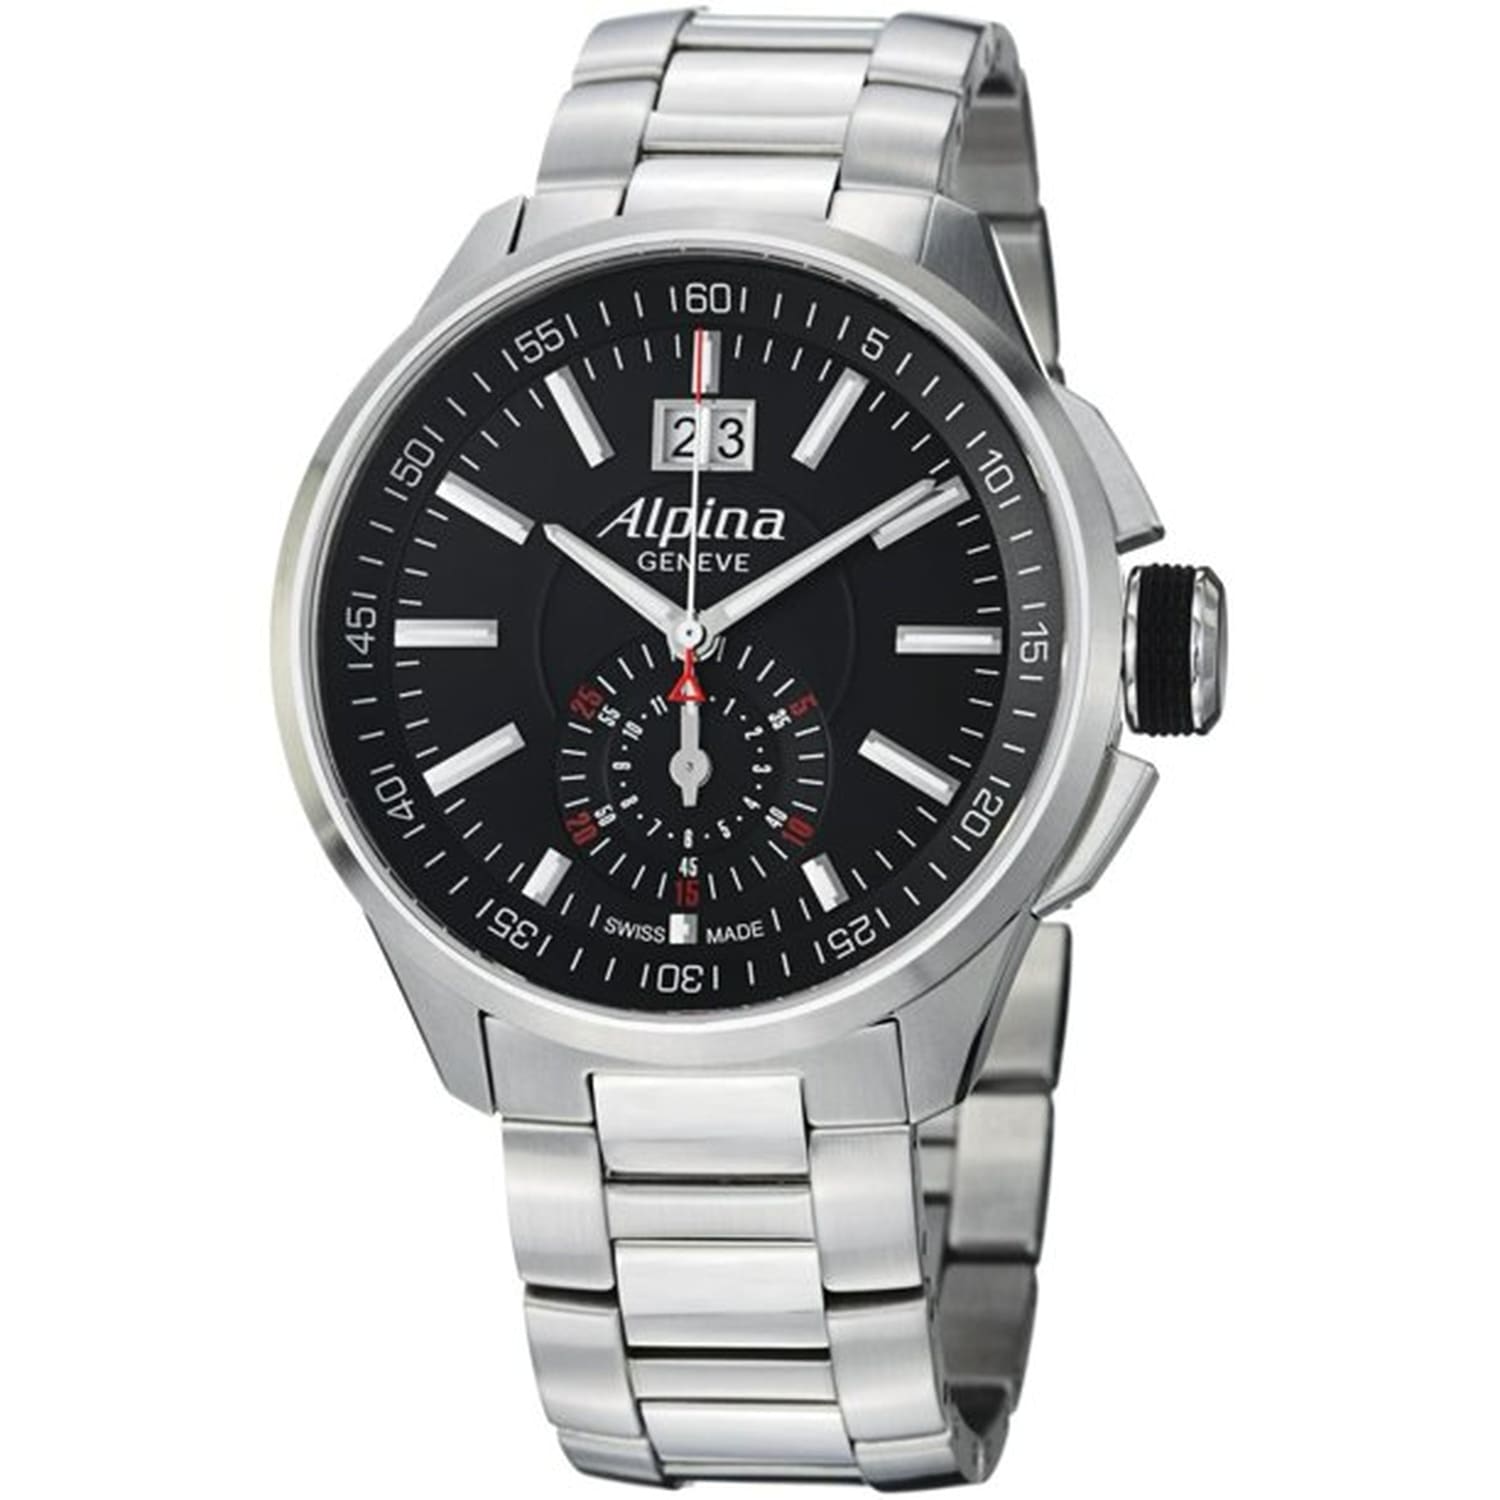 Alpina Men’s ’Racing’ Black Dial Stainless Steel Chronograph